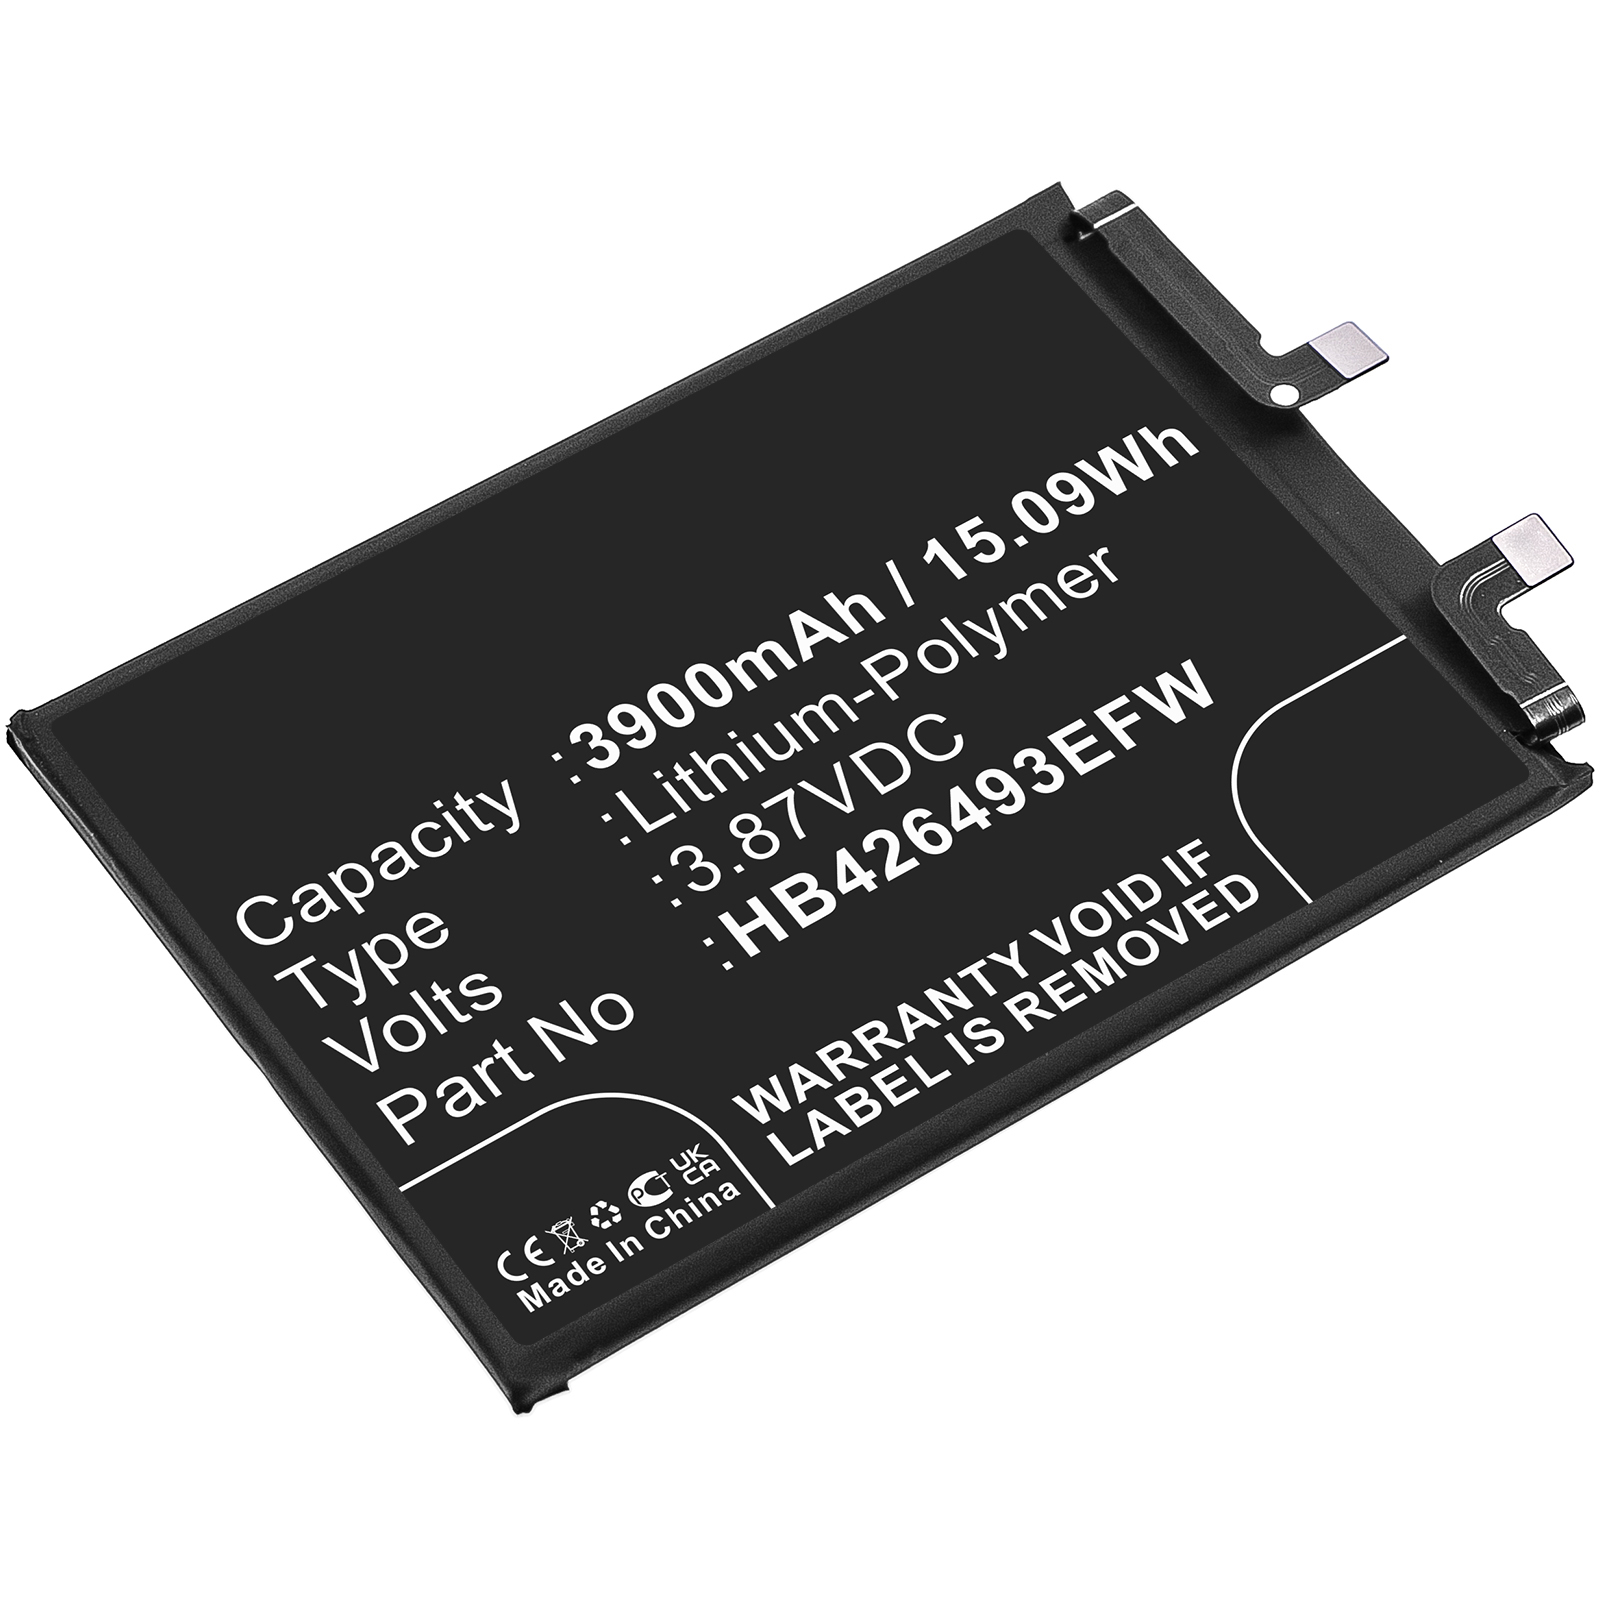 Synergy Digital Cell Phone Battery, Compatible with Huawei HB426493EFW Cell Phone Battery (Li-Pol, 3.87V, 3900mAh)